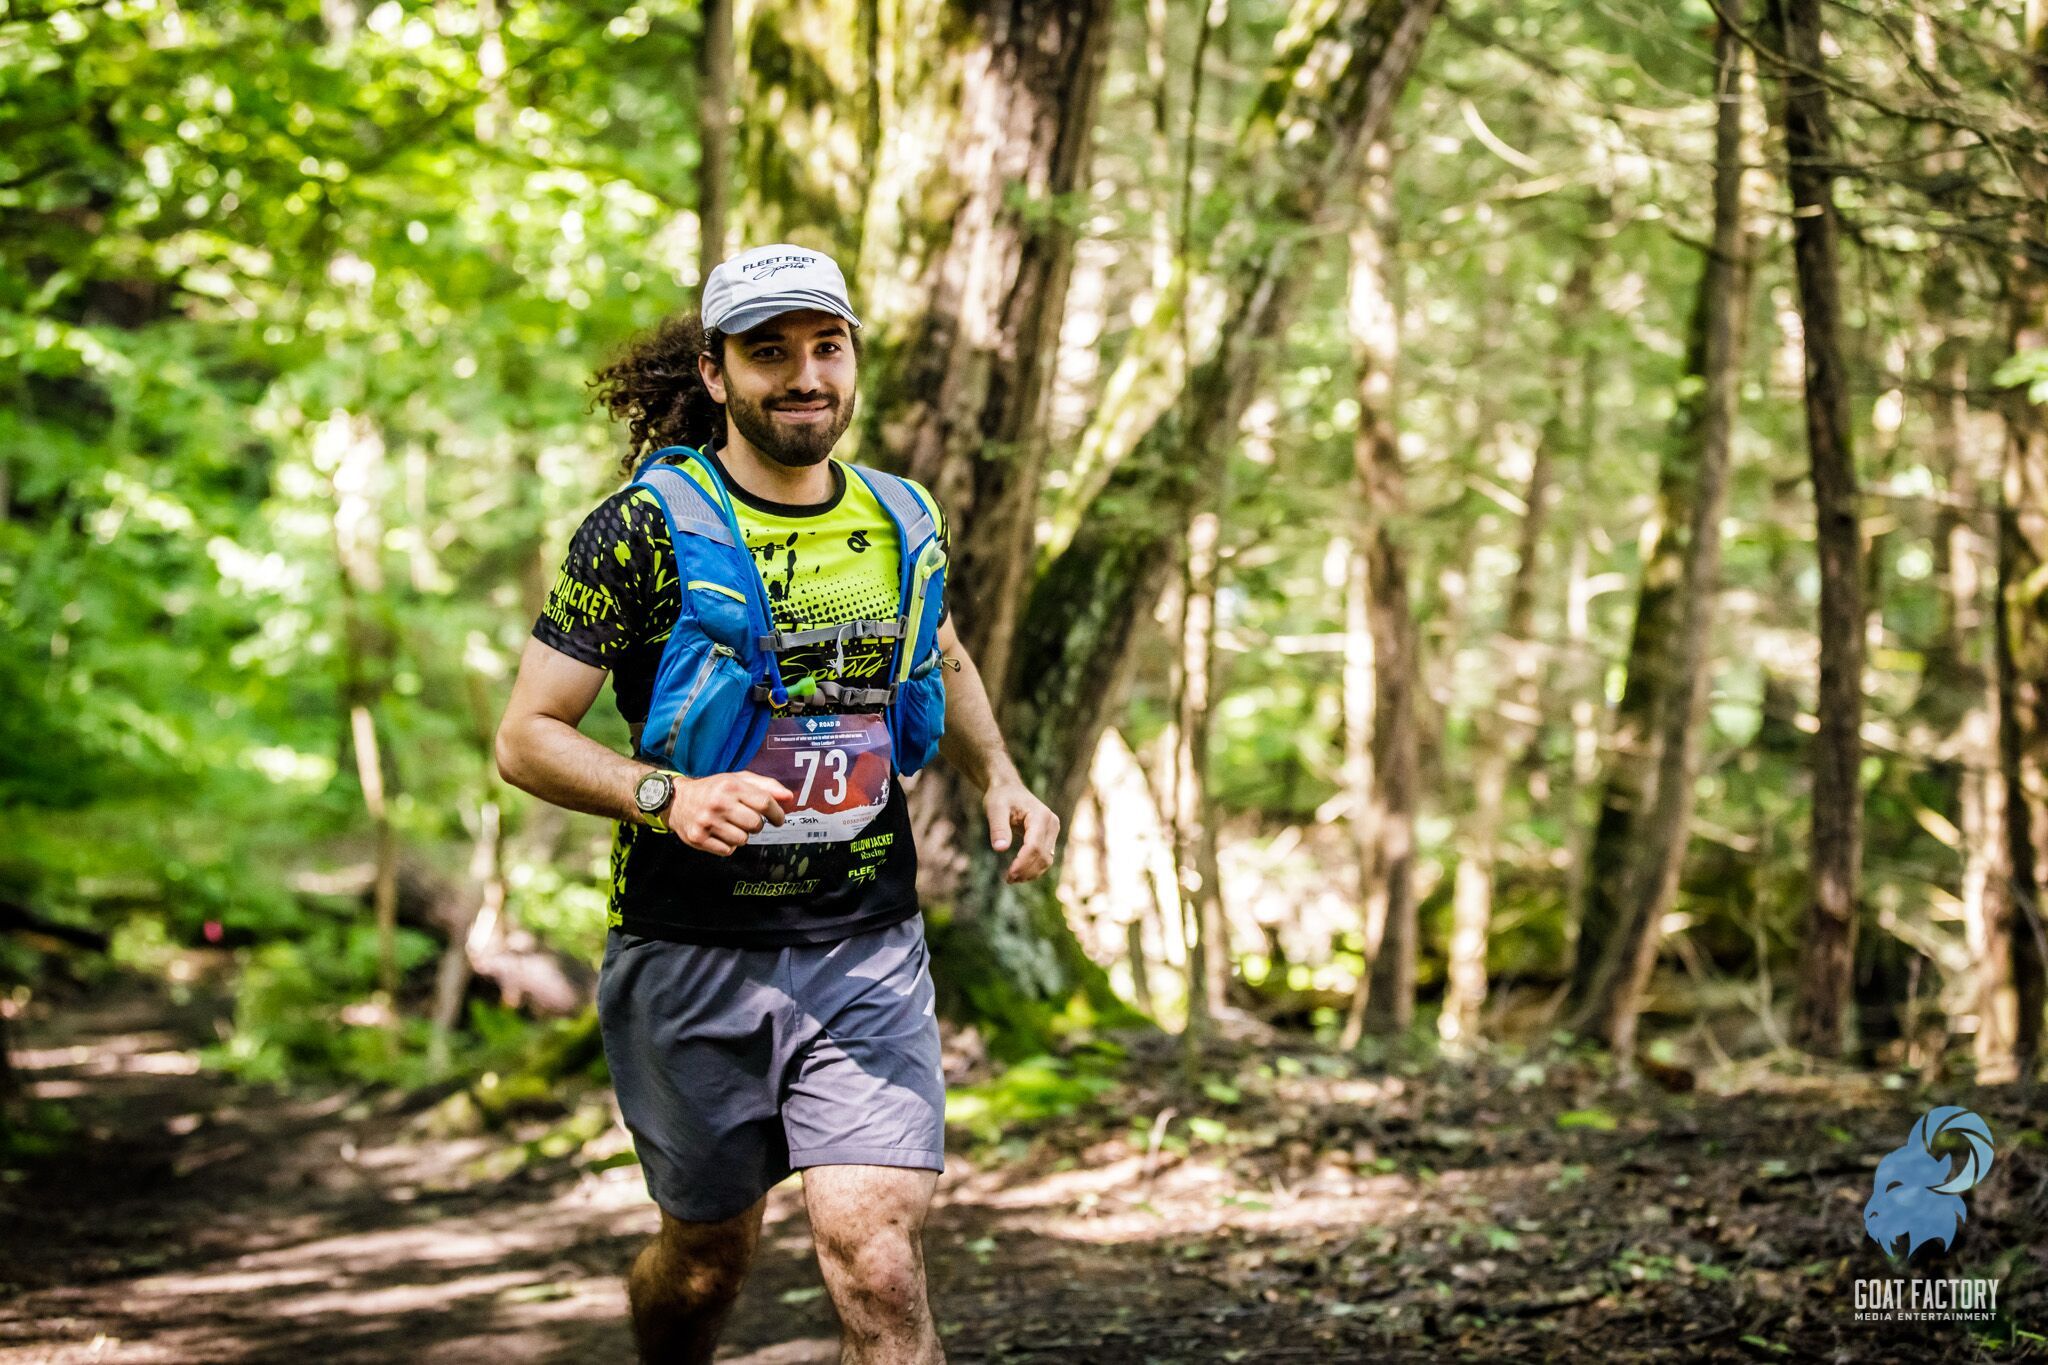 Photo of me taken by Goat Face Media in the woods at mile 22, smiling trying to hide the fact there is food in my mouth